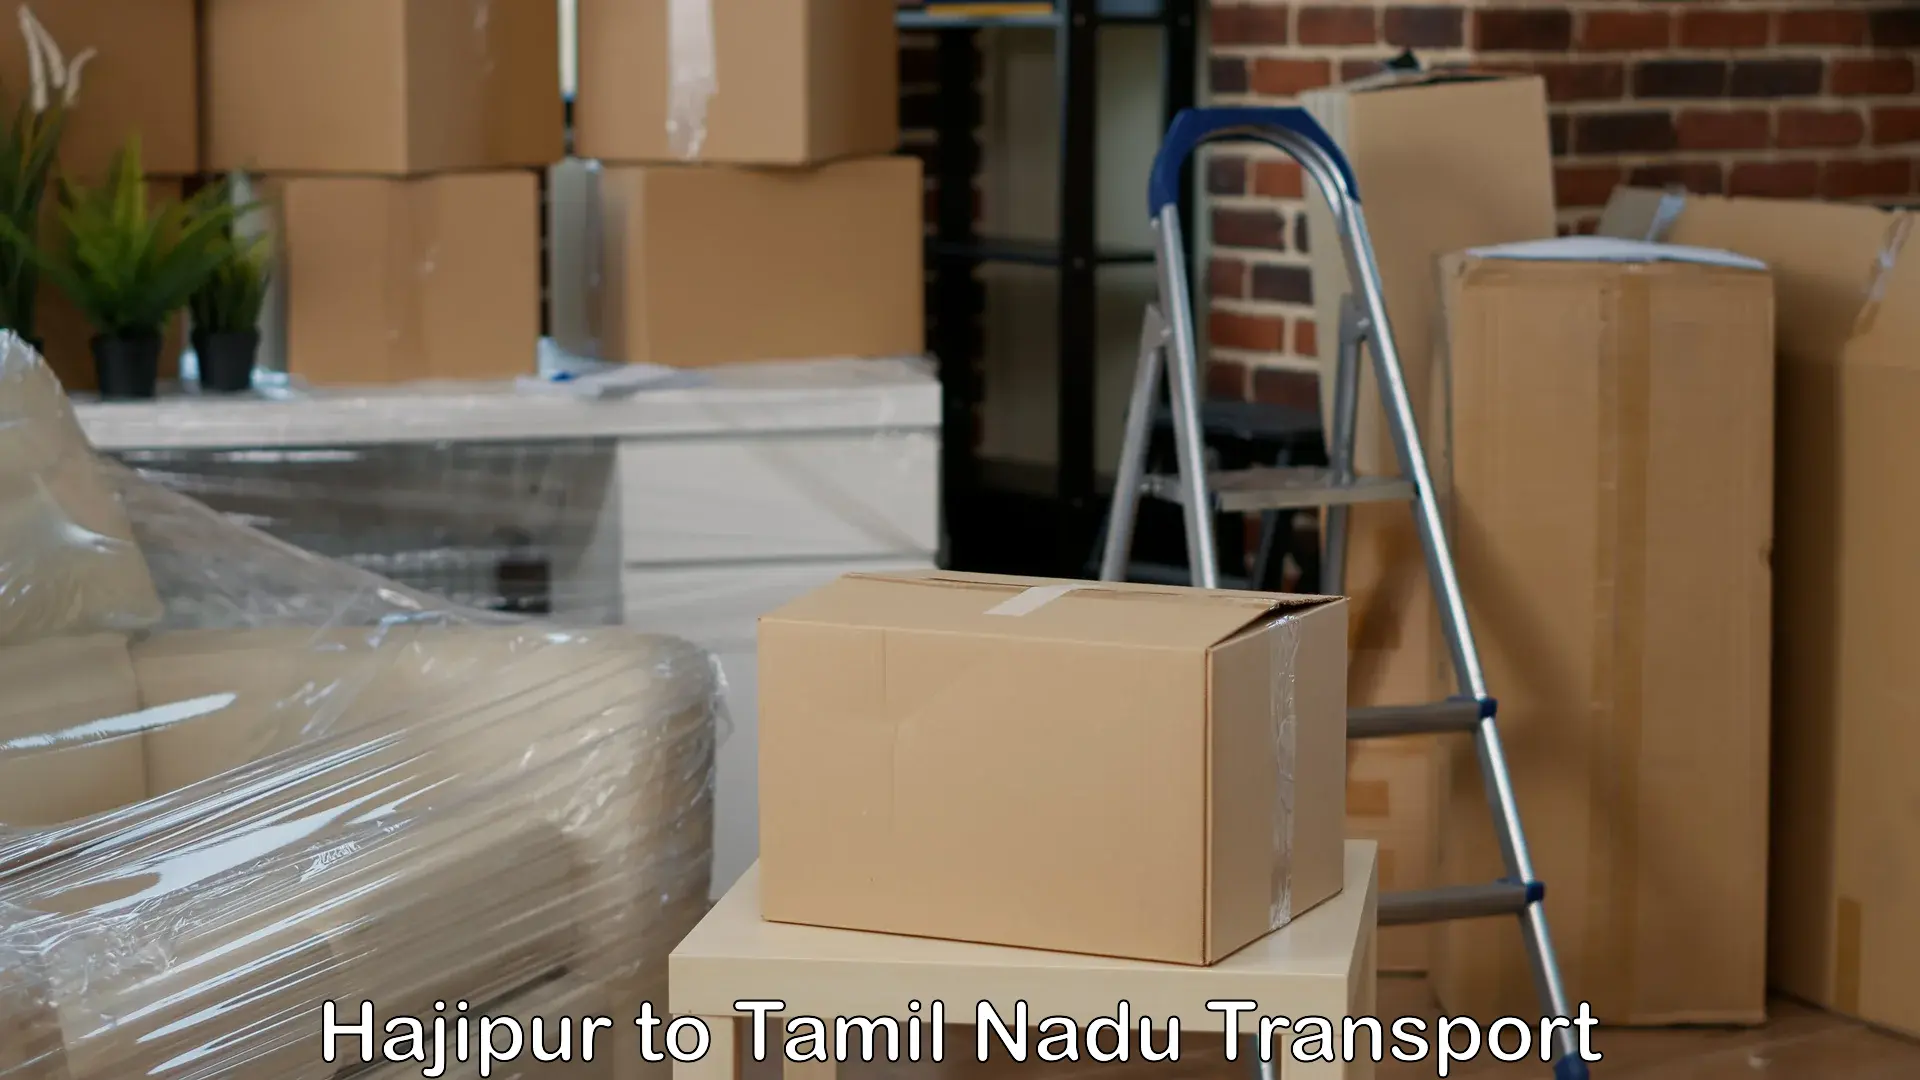 Cycle transportation service Hajipur to Vellore Institute of Technology